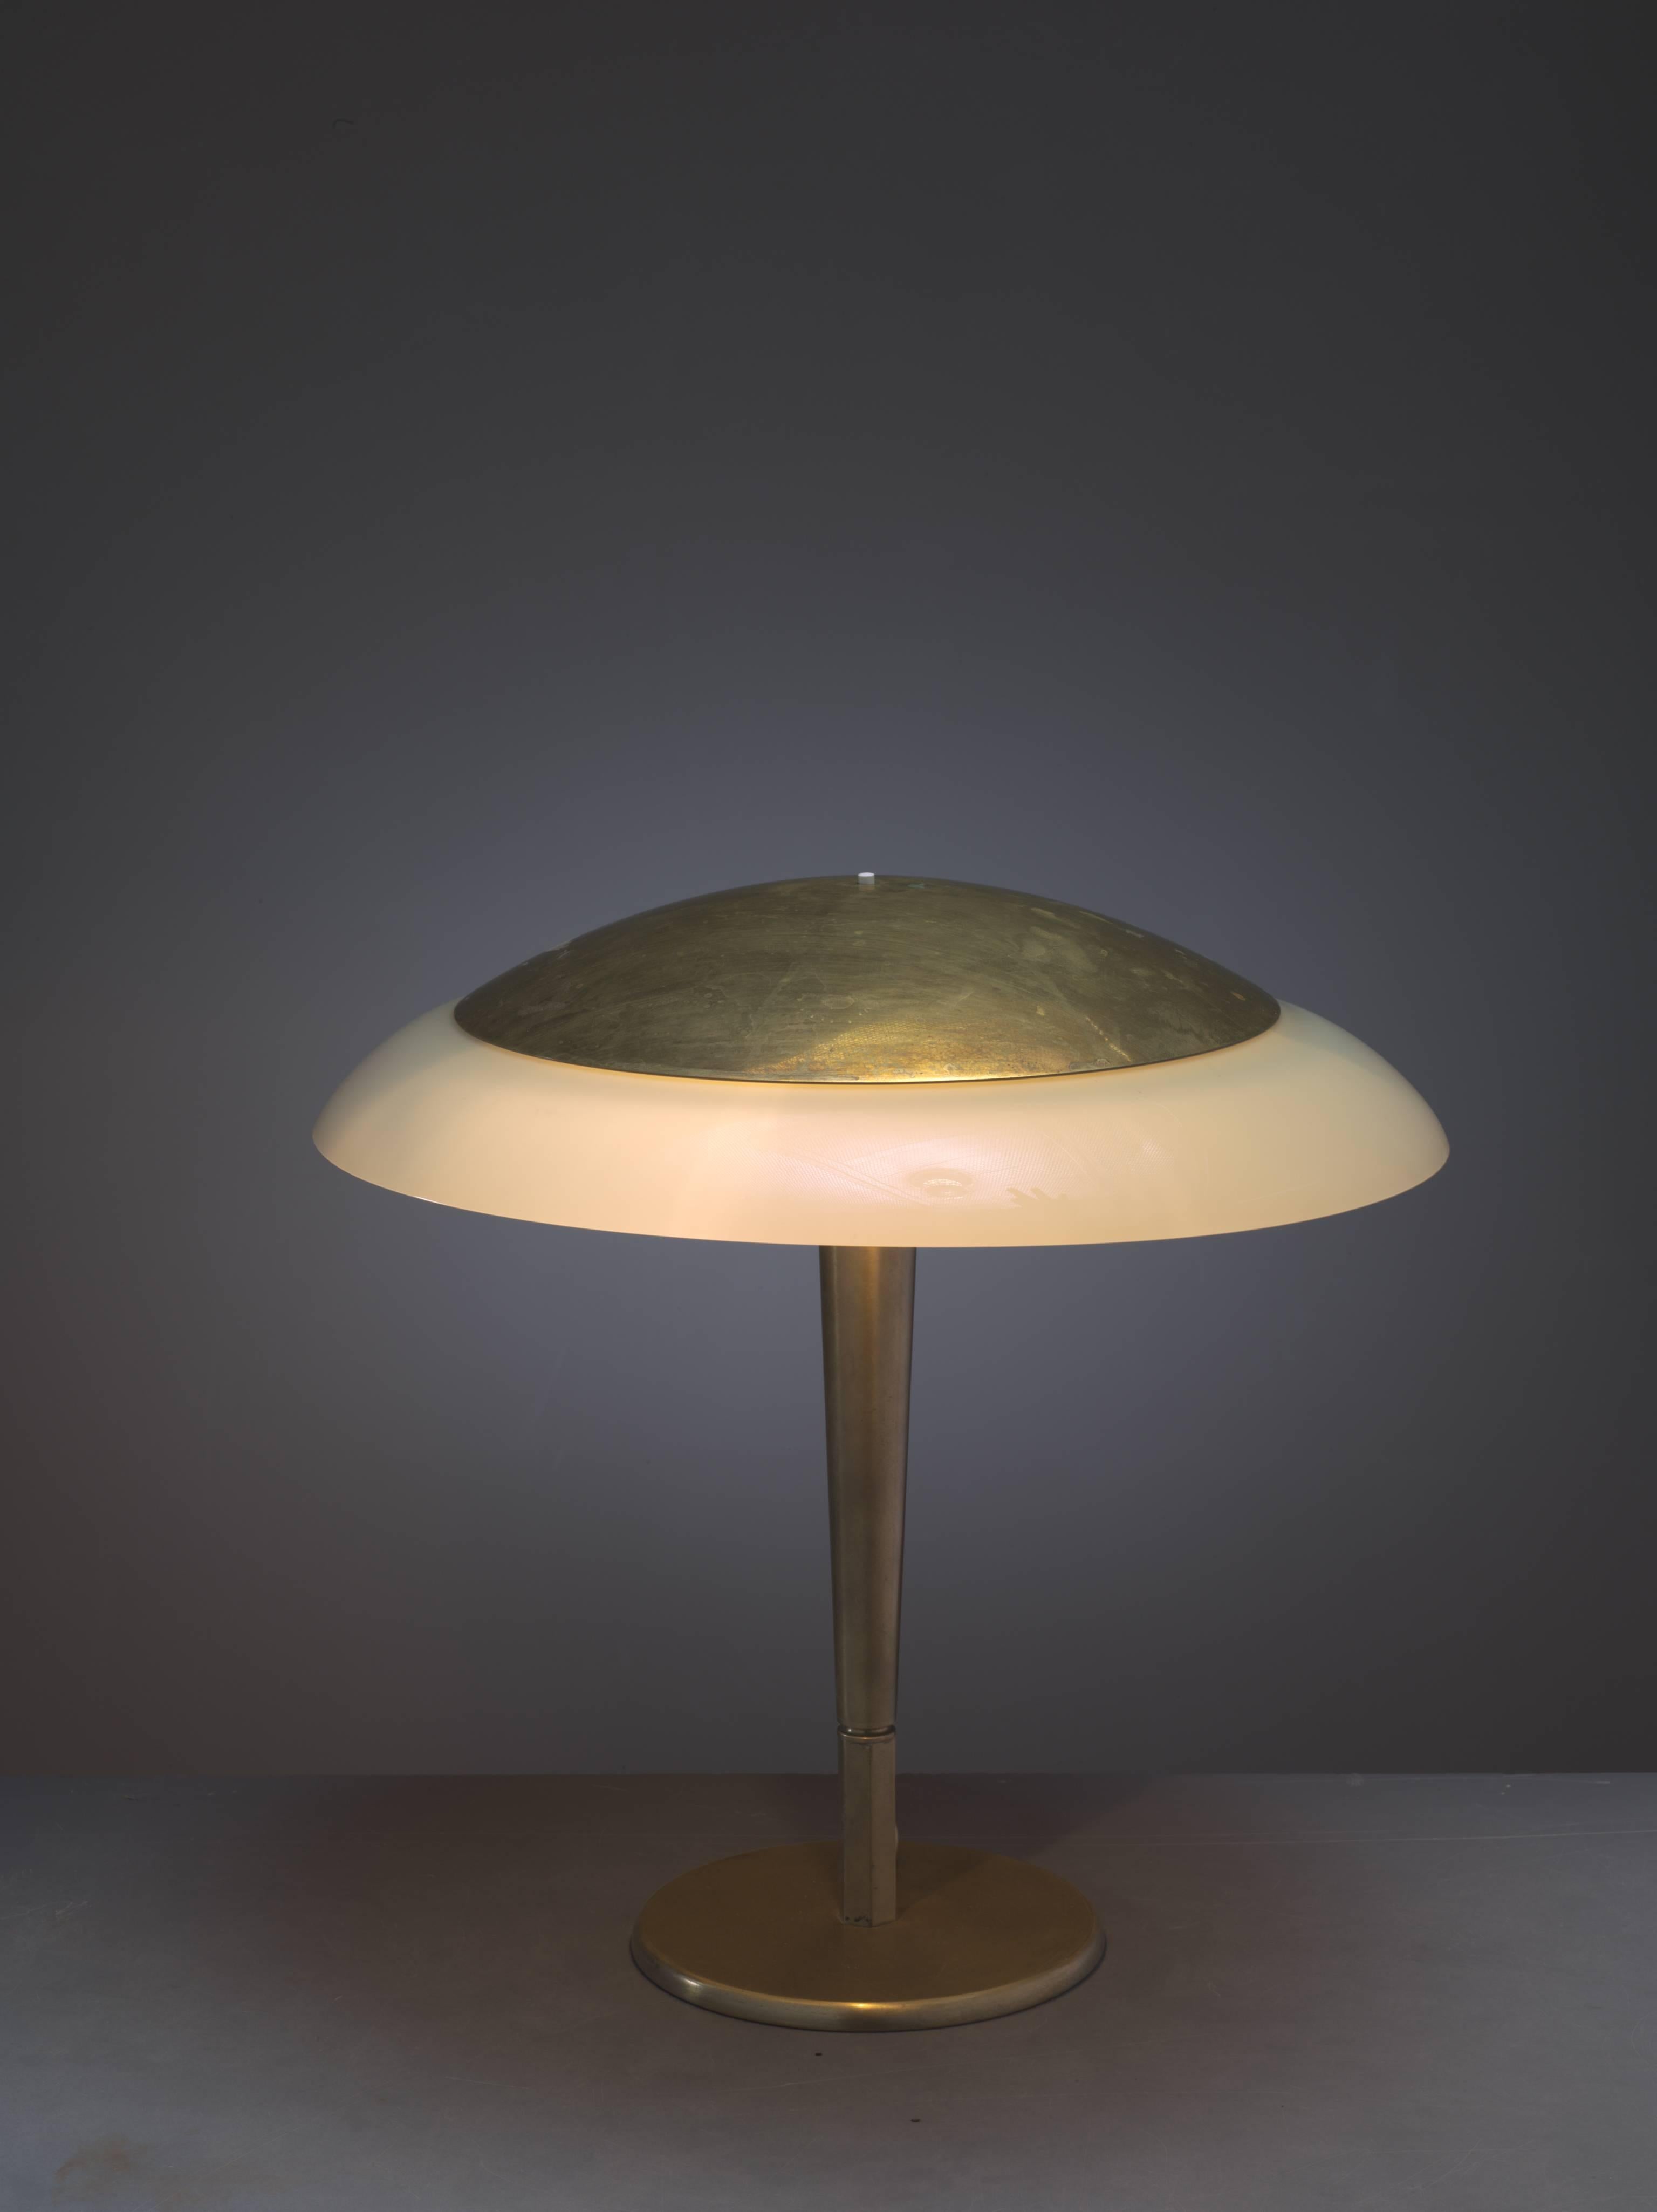 A rare and early model 5061 table lamp by Paavo Tynell, visibly marked with 'Taito' and the model number.
The lamp is made of a heavy brass base and stem with an opaline glass shade, with a smaller brass cap on top.